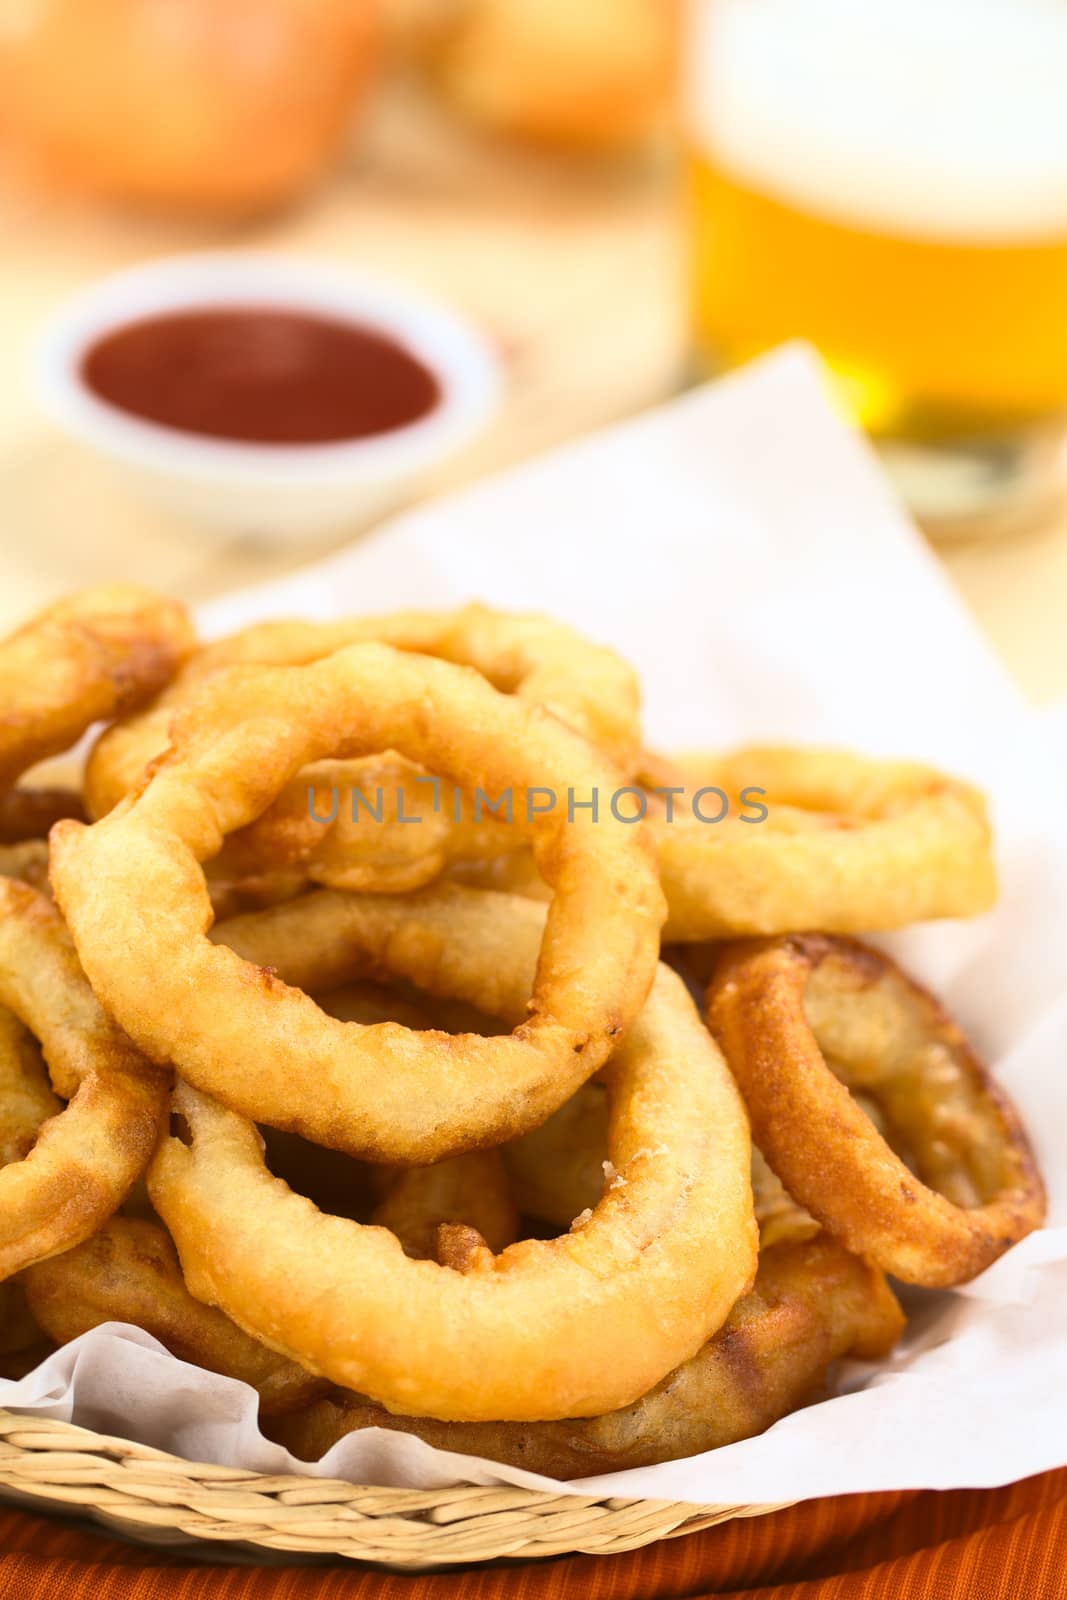 Beer-Battered Onion Rings by ildi